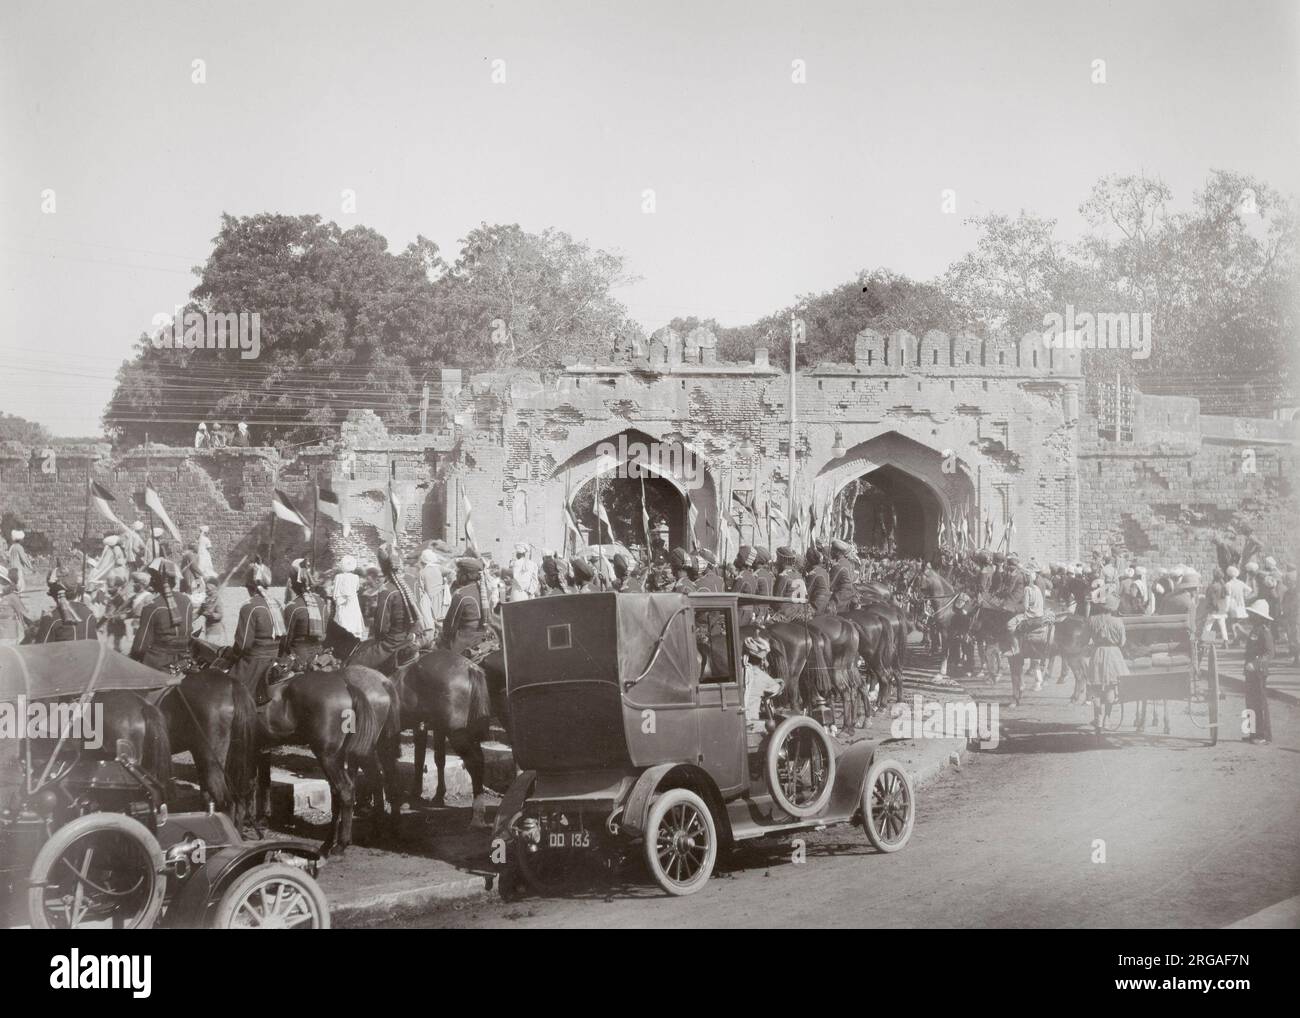 Delhi at the time of the Delhi Durbar, probably 1911, though very similar to the 1903 event. Early motor cars and cavalry at the Cashemre, Kashmir Gate. Stock Photo